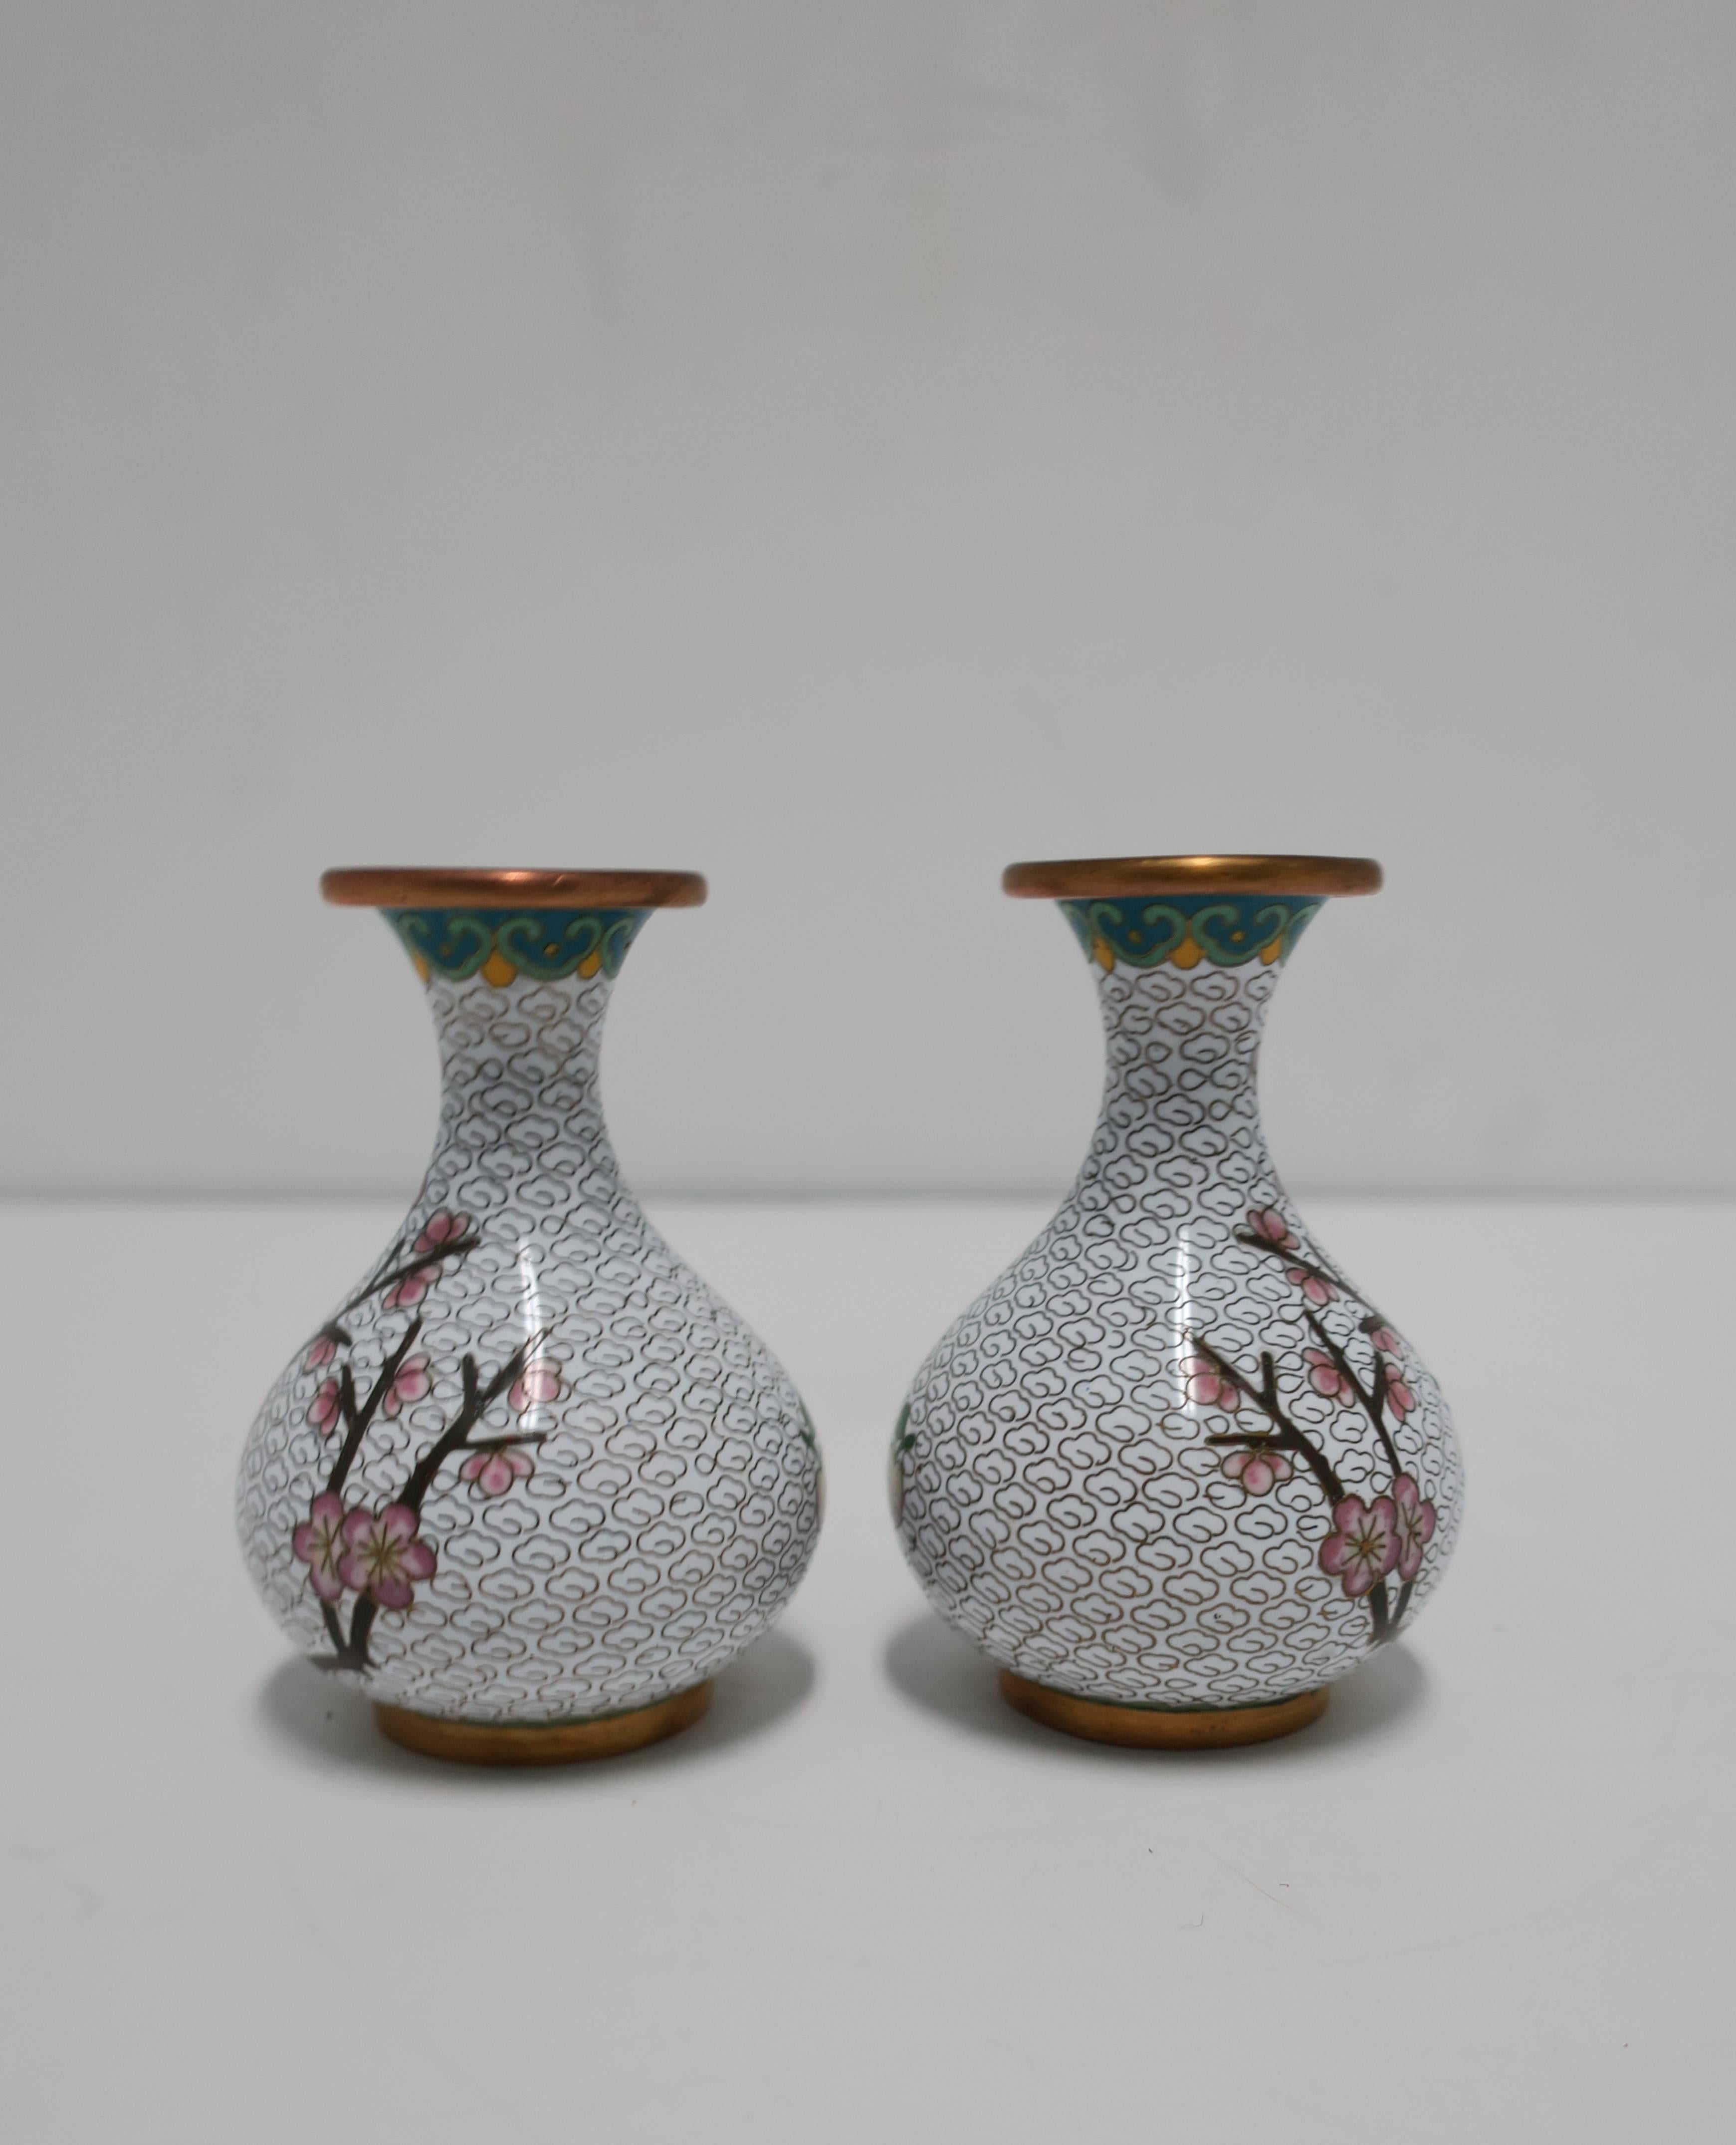 20th Century White and Pink Cloisonné Enamel Brass Vases with Cherry Blossom Design, Pair For Sale